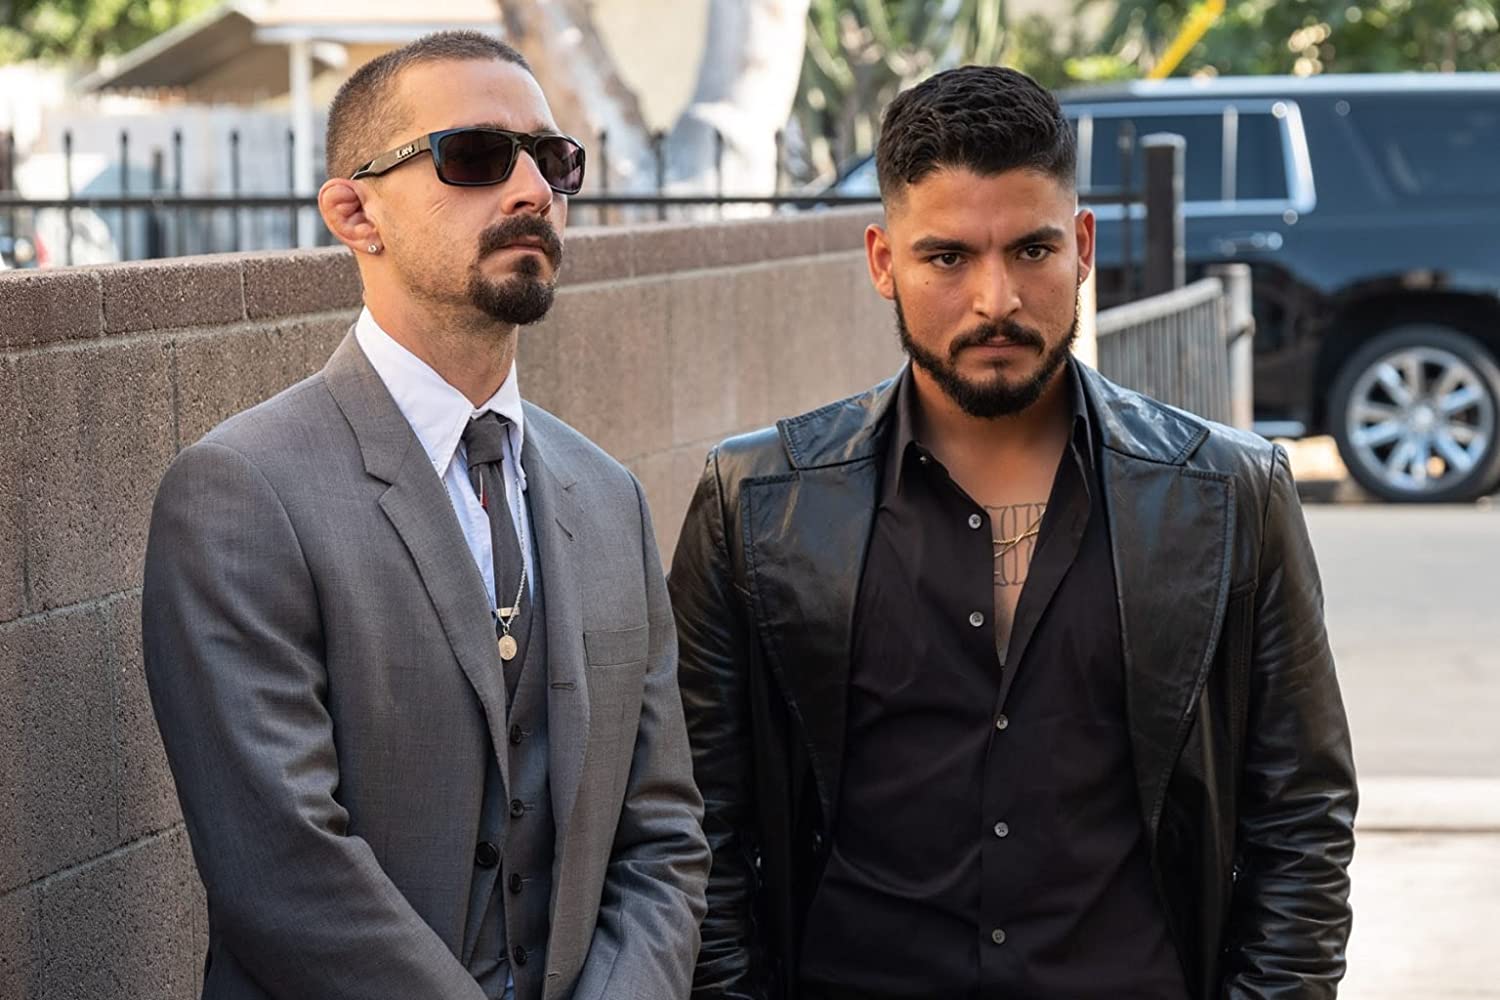 Shia LaBeouf and Bobby Soto in The Tax Collector (2020)